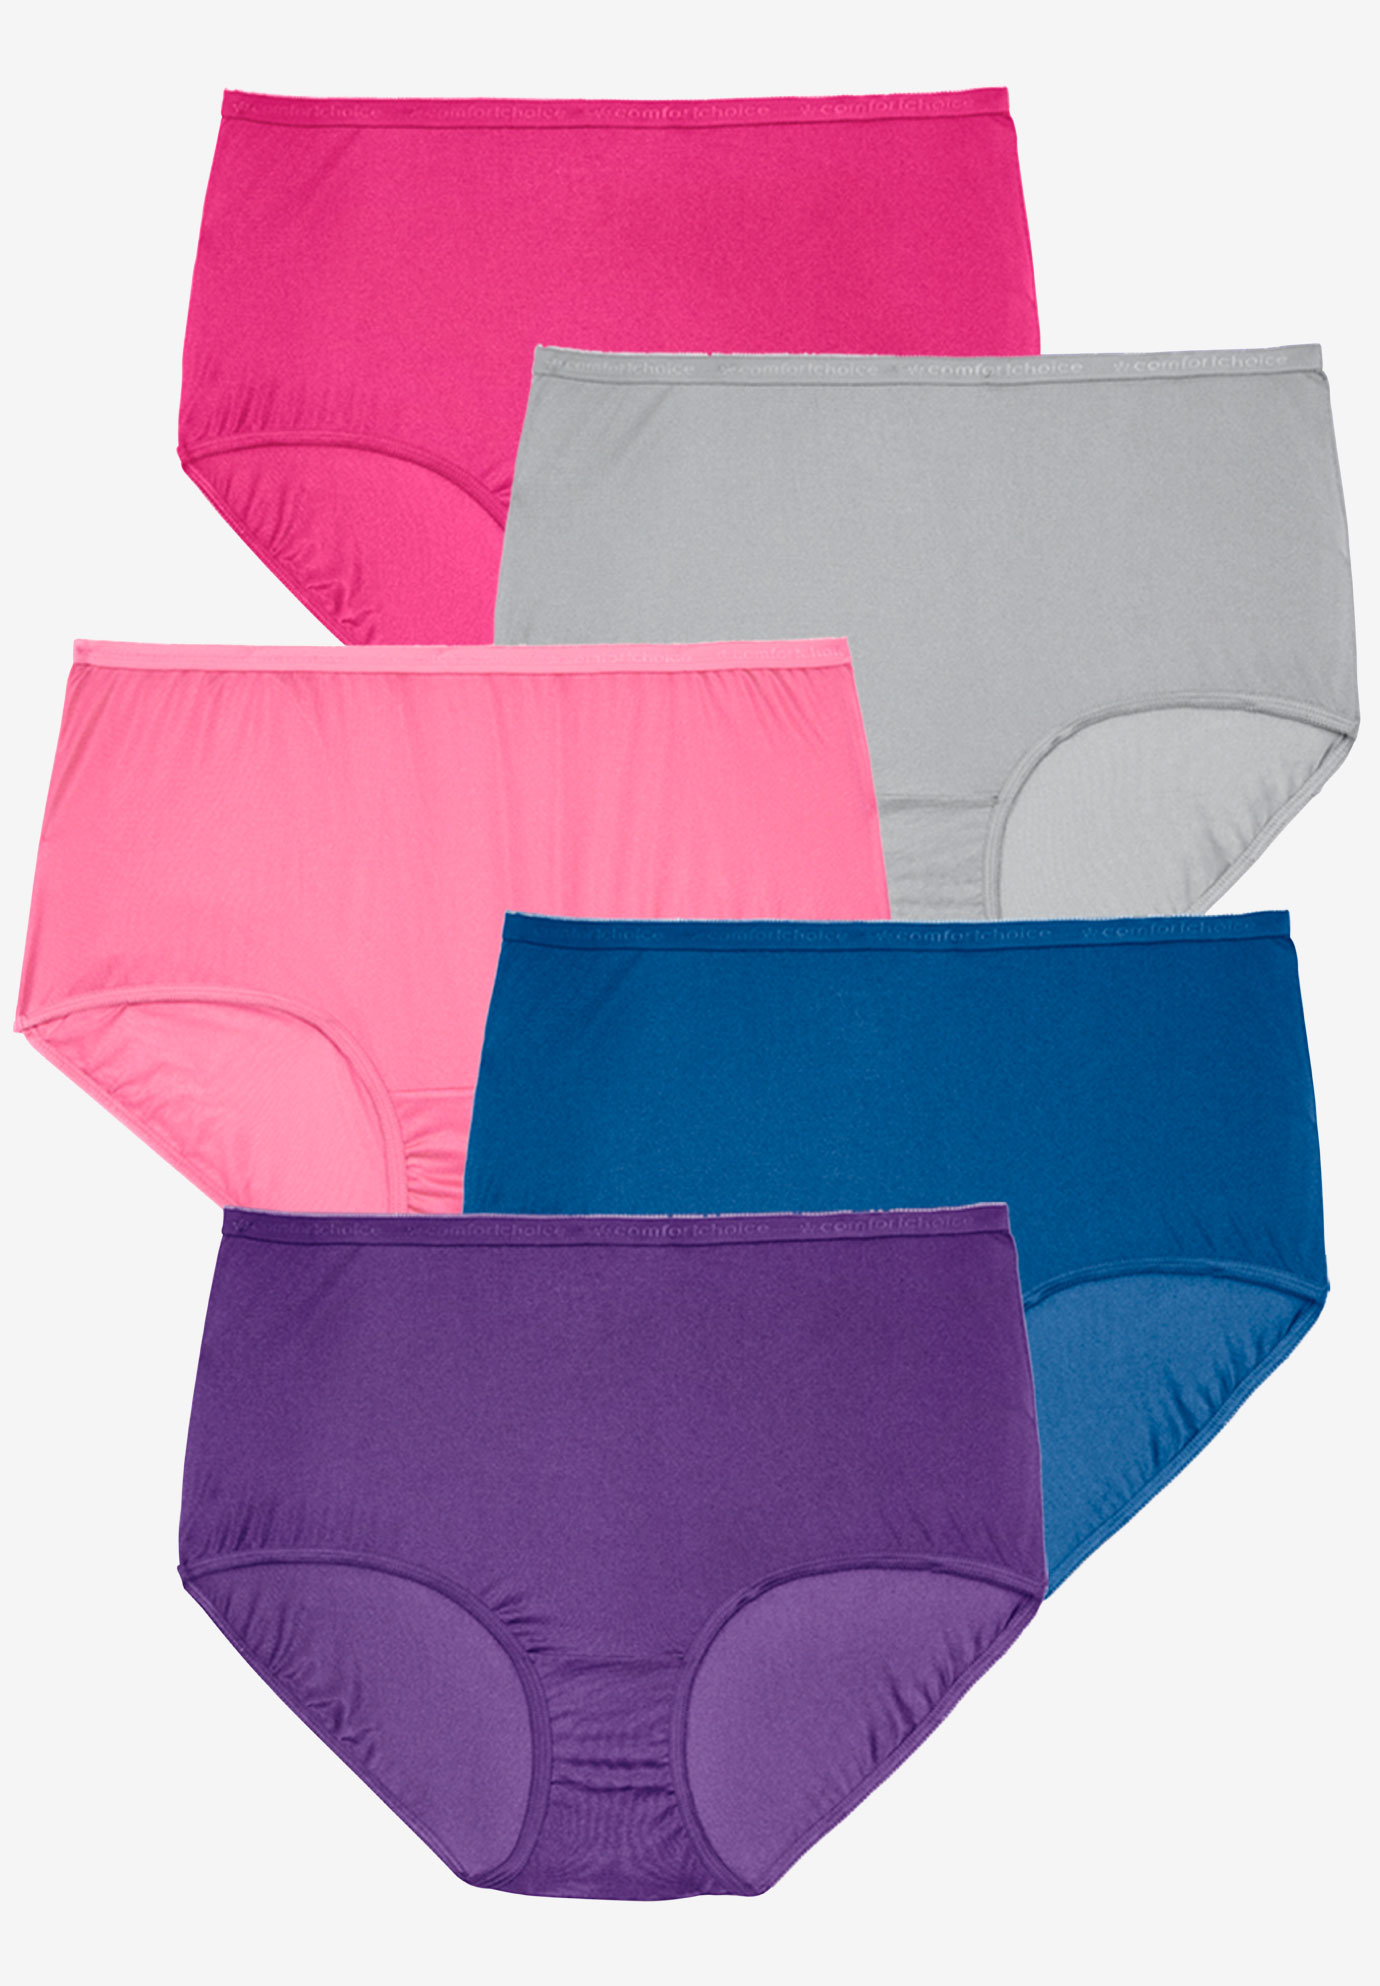 5-Pack Nylon Full-Cut Brief by Comfort Choice®| Plus Size Brief Panties ...